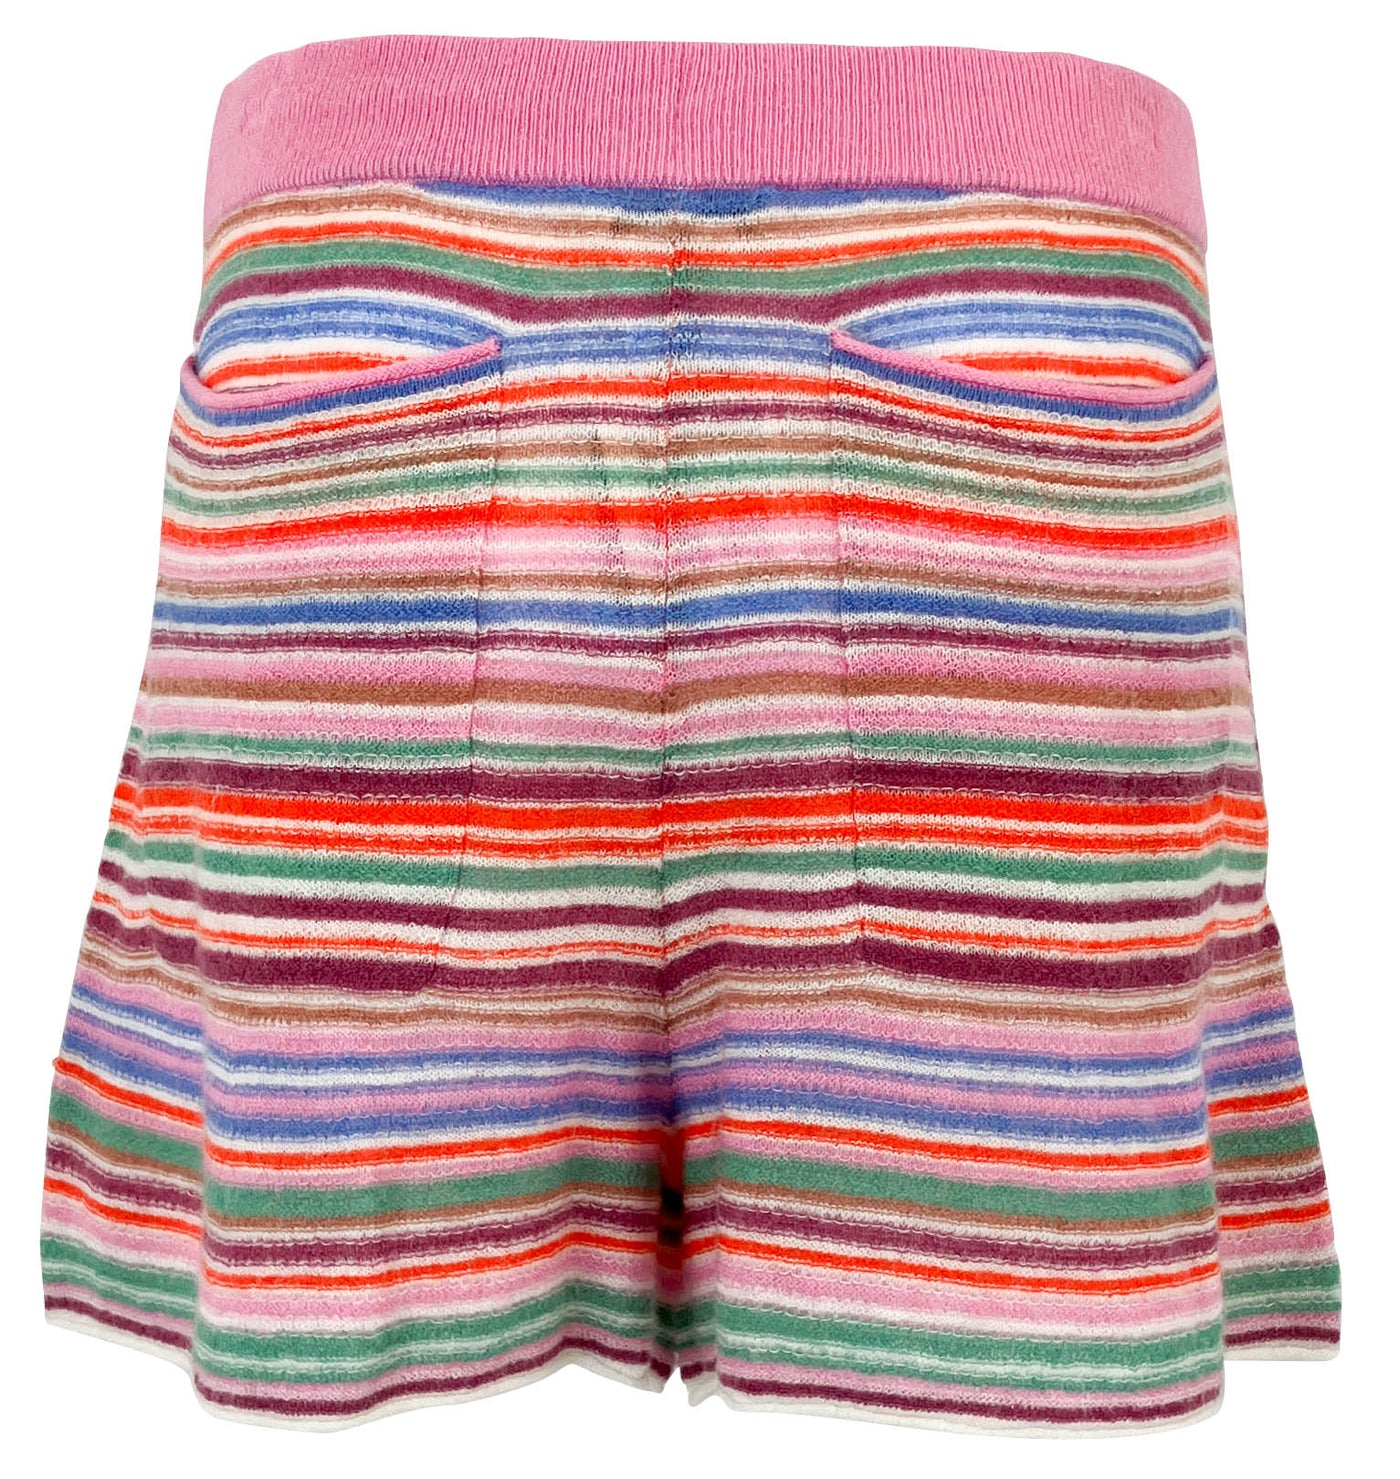 Dorothee Schumacher Striped Softness Shorts in Colorful - Discounts on Dorothee Schumacher at UAL